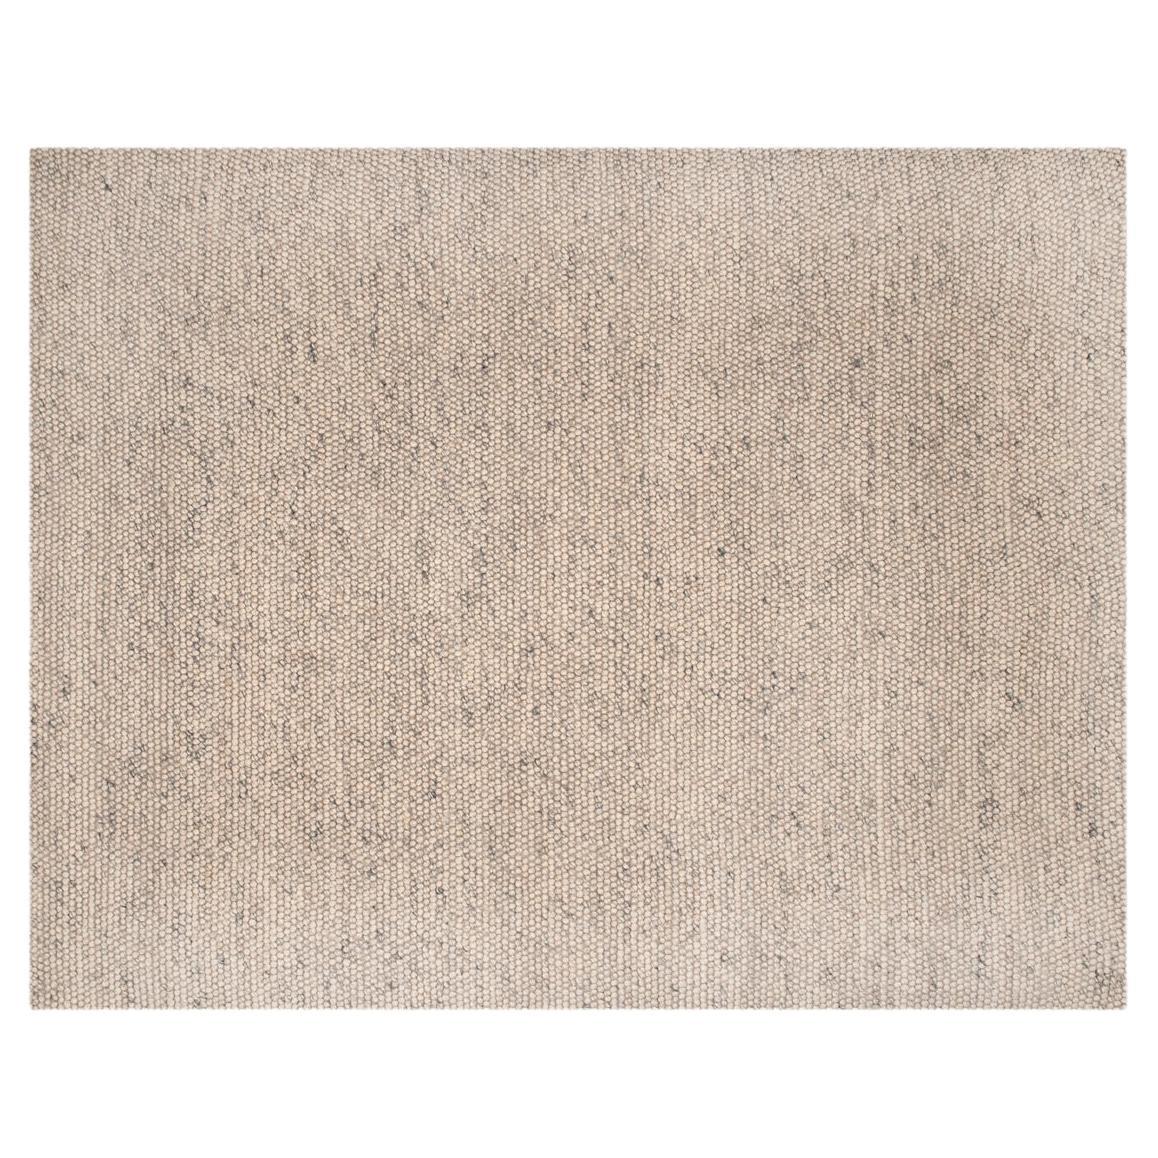 Modern Handwoven Wool Thick Rug Carpet Bubbles Ivory & Grey Mottled Plain For Sale